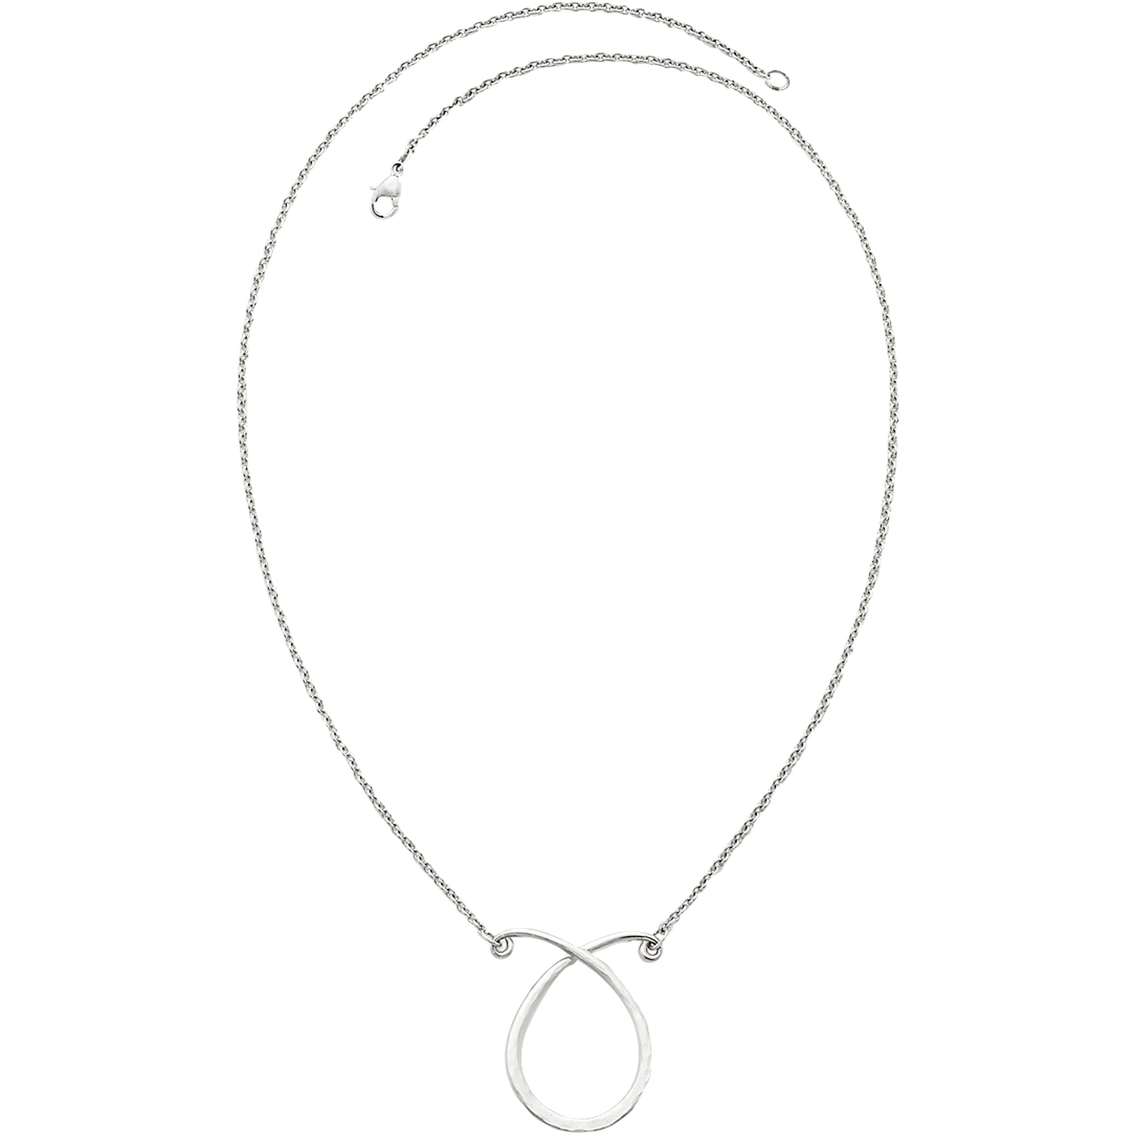 James Avery Changeable Loop Charm Holder Necklace 18 In. | Silver ...